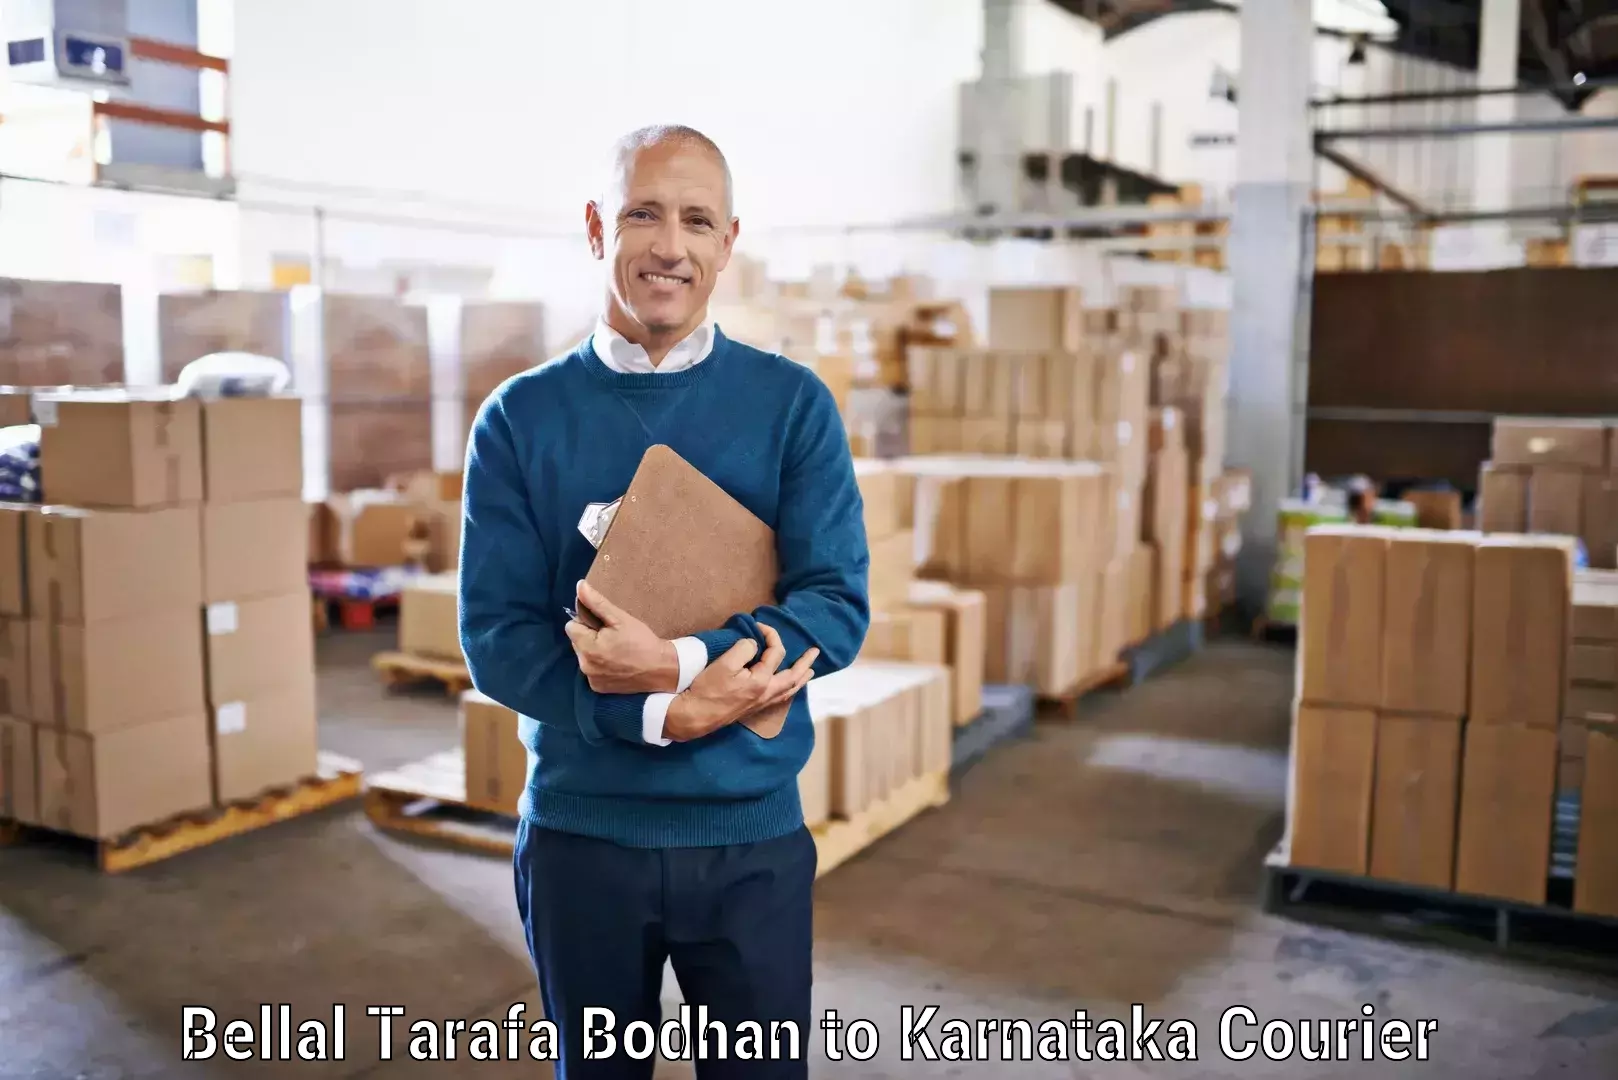 Efficient package consolidation in Bellal Tarafa Bodhan to Gundlupete